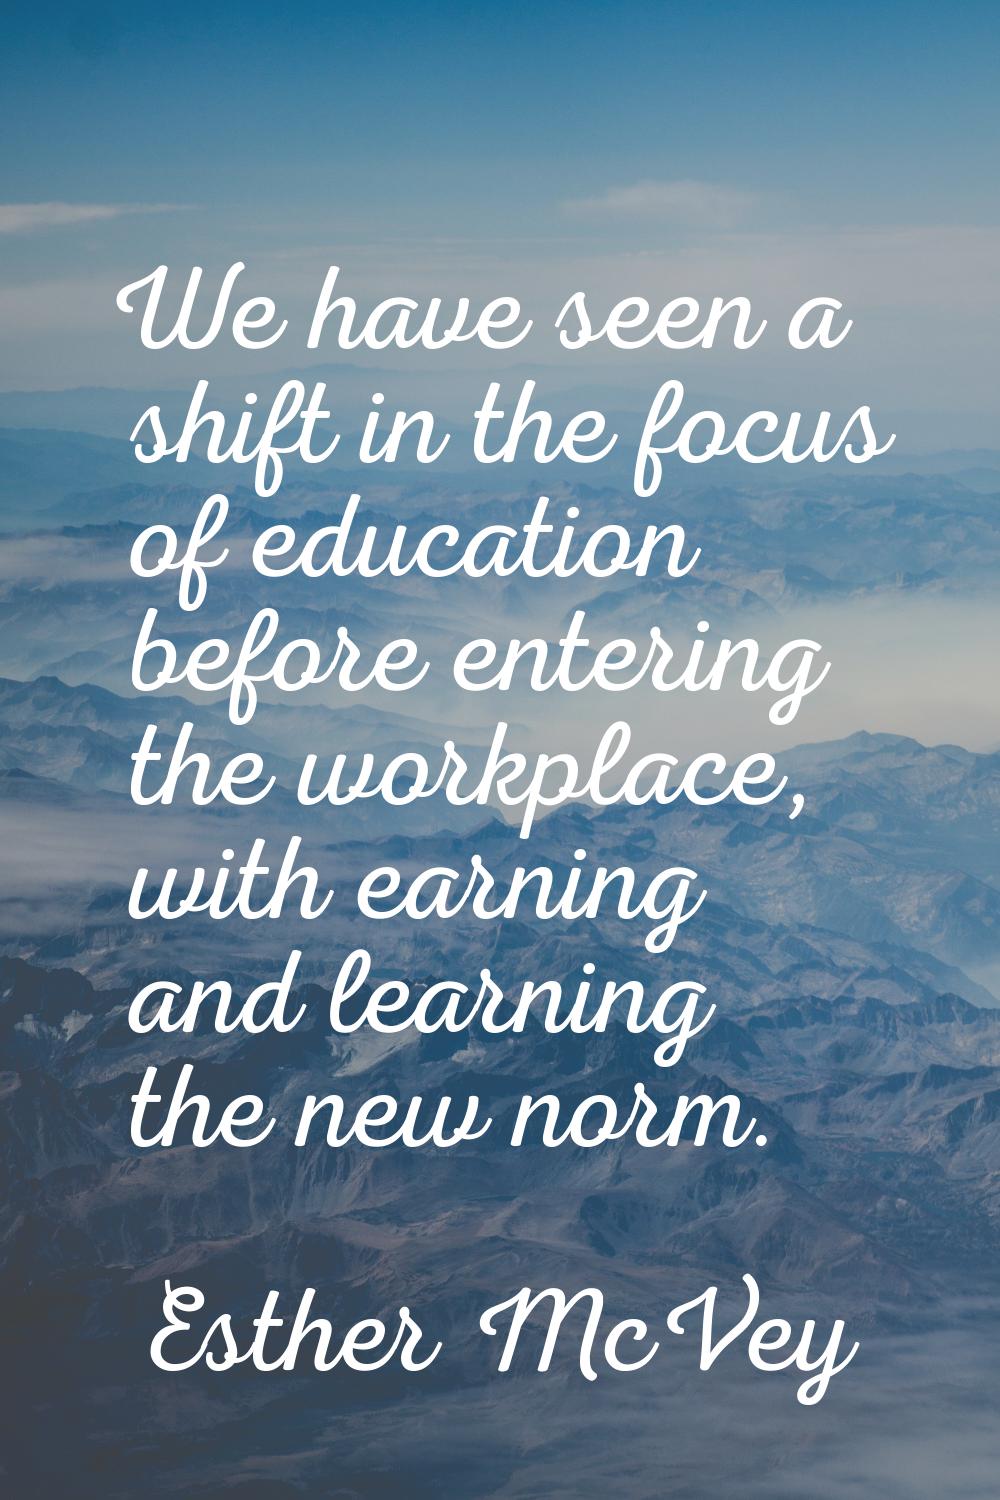 We have seen a shift in the focus of education before entering the workplace, with earning and lear